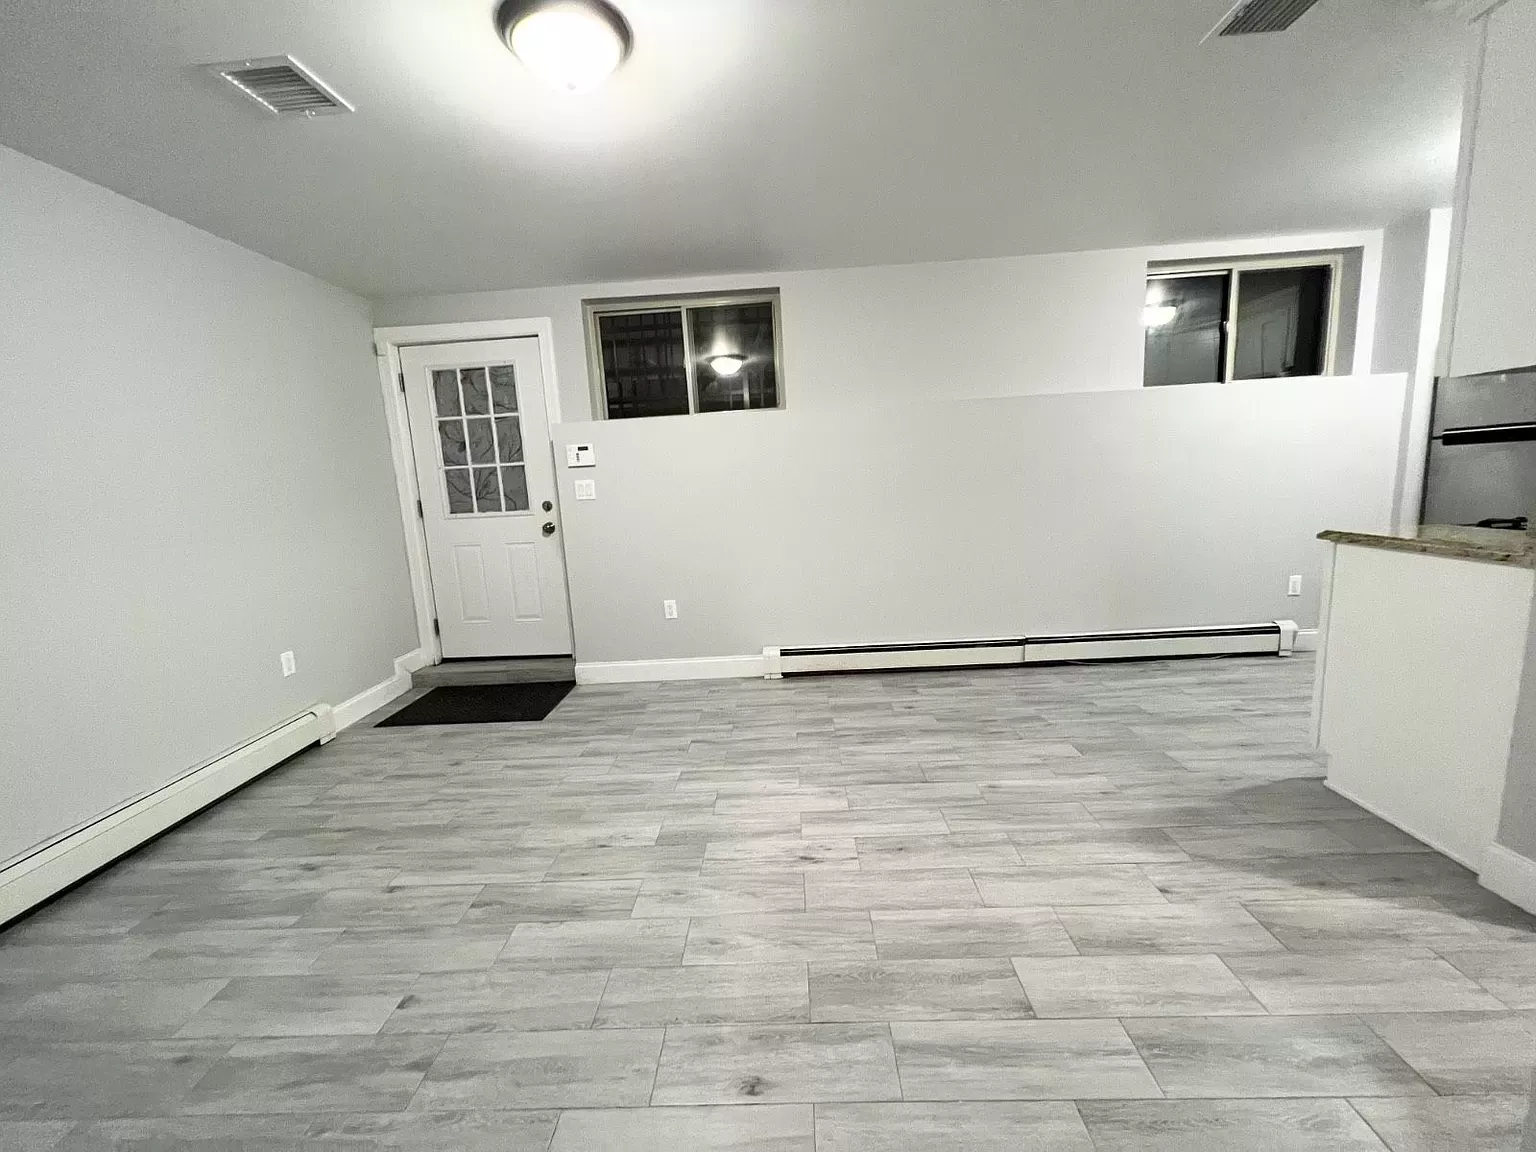 Apartment for Rent in Princes Bay, New York Staten Island